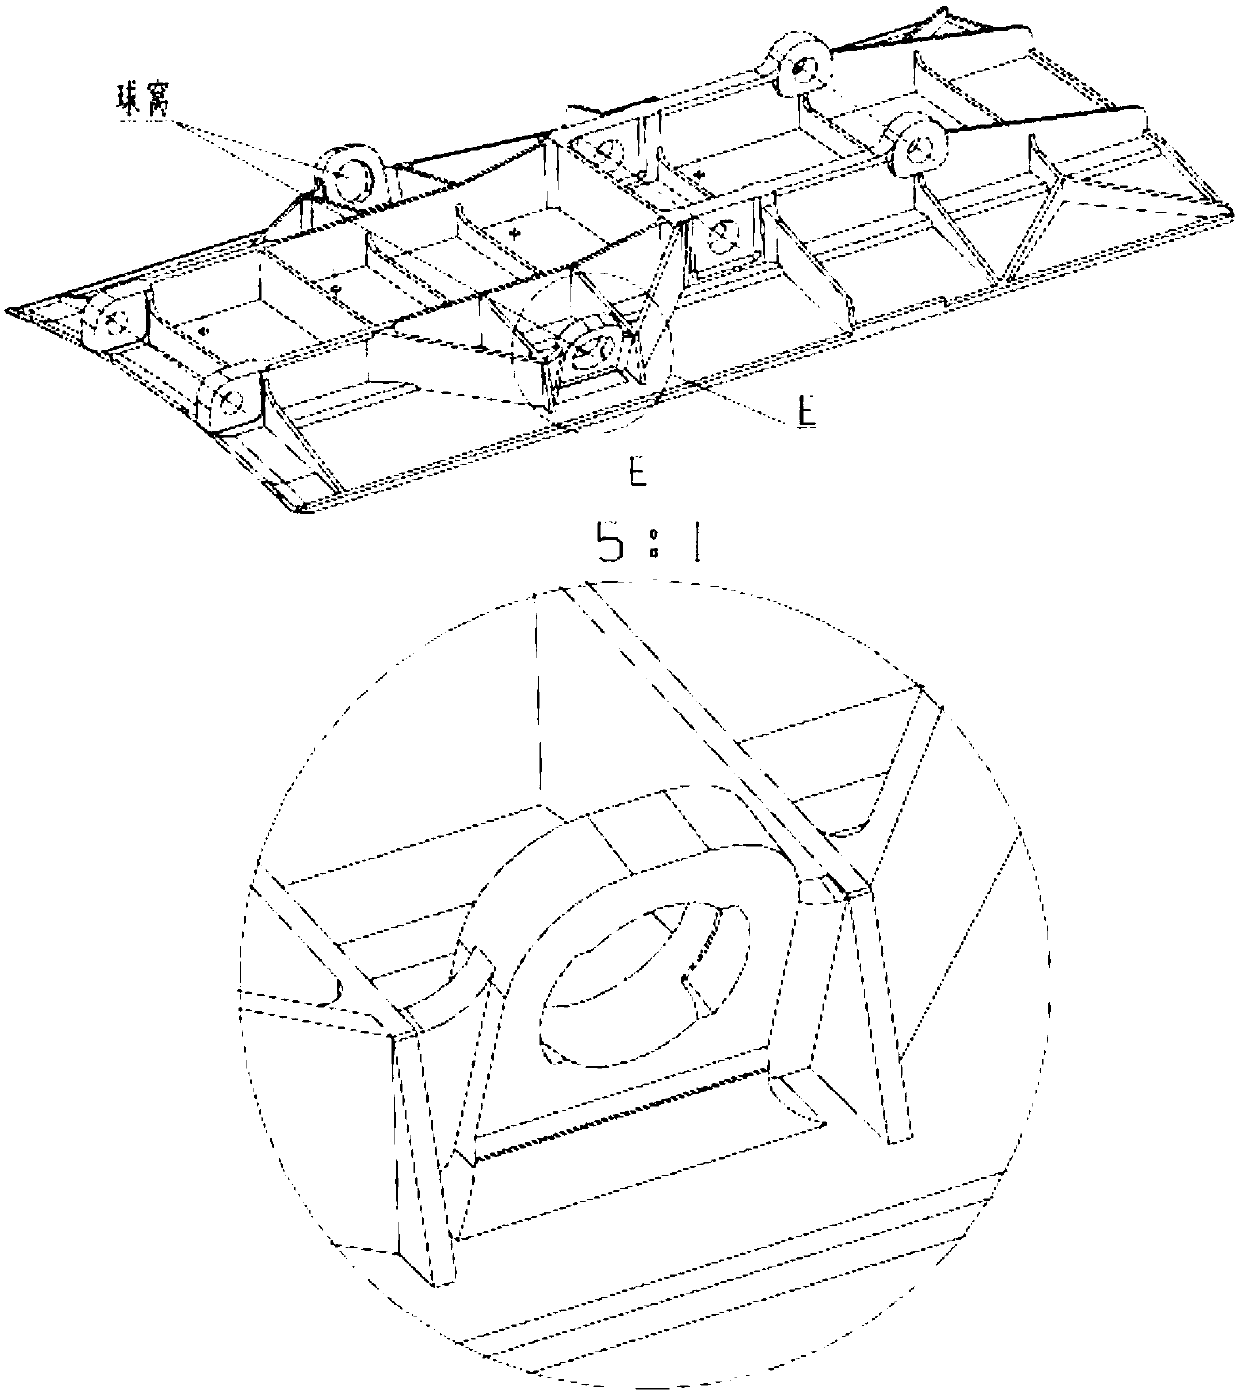 A processing method for a ball socket groove